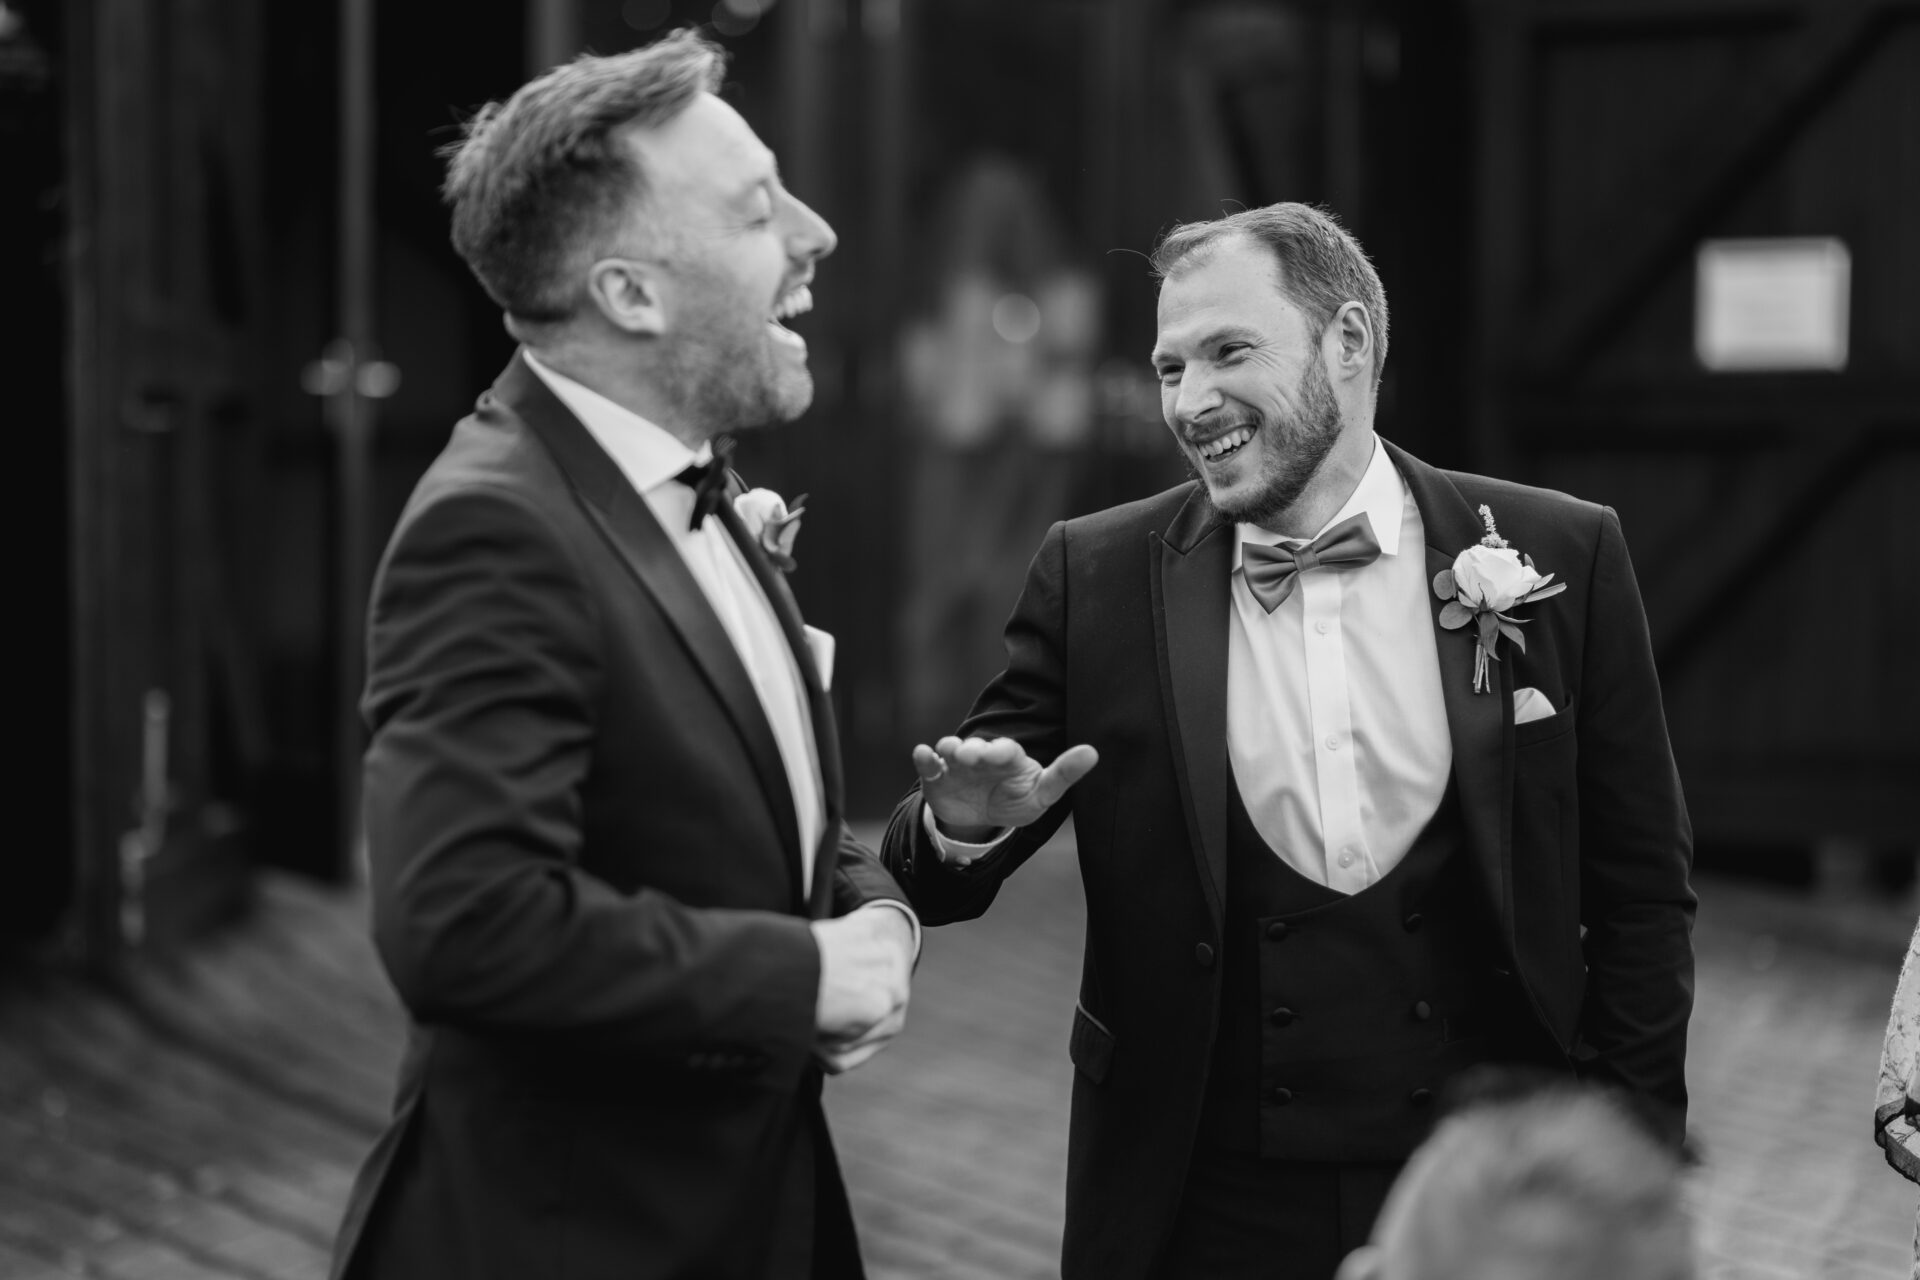 The groom and his best man share a joke at Old Luxters Barn wedding venue in Oxfordshire